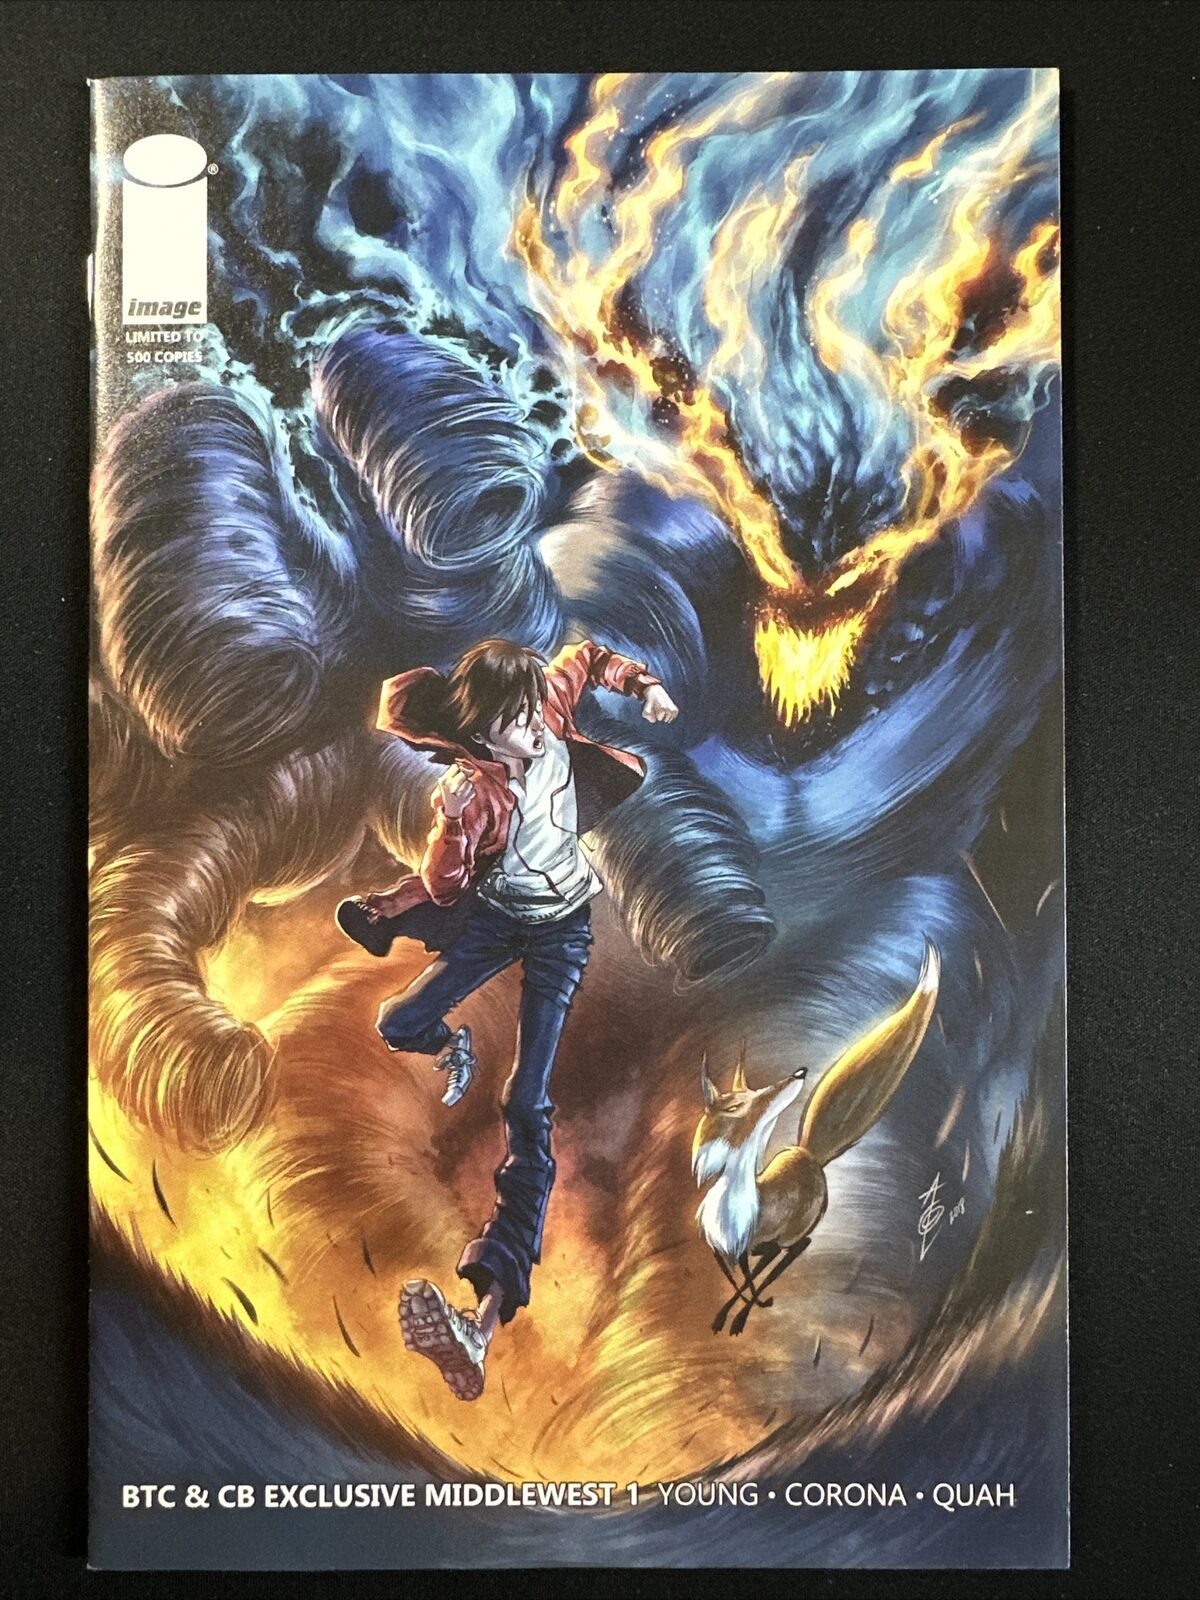 Middlewest #1 Image Big Time Collectibles Exclusive Ltd #ed 500 Variant NM *A5